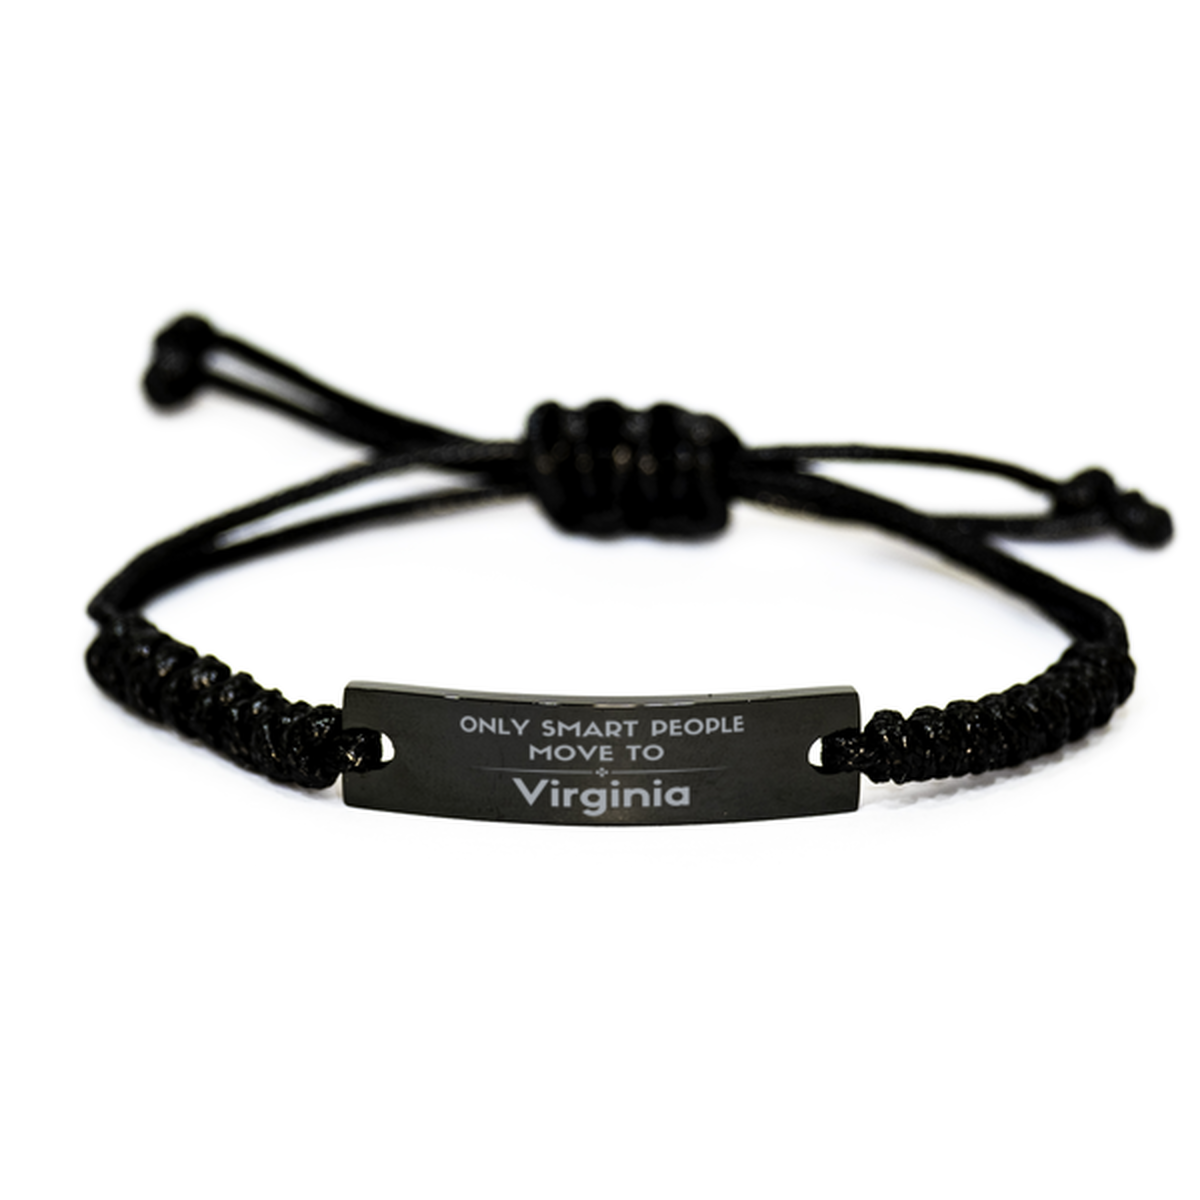 Only smart people move to Virginia Black Rope Bracelet, Gag Gifts For Virginia, Move to Virginia Gifts for Friends Coworker Funny Saying Quote